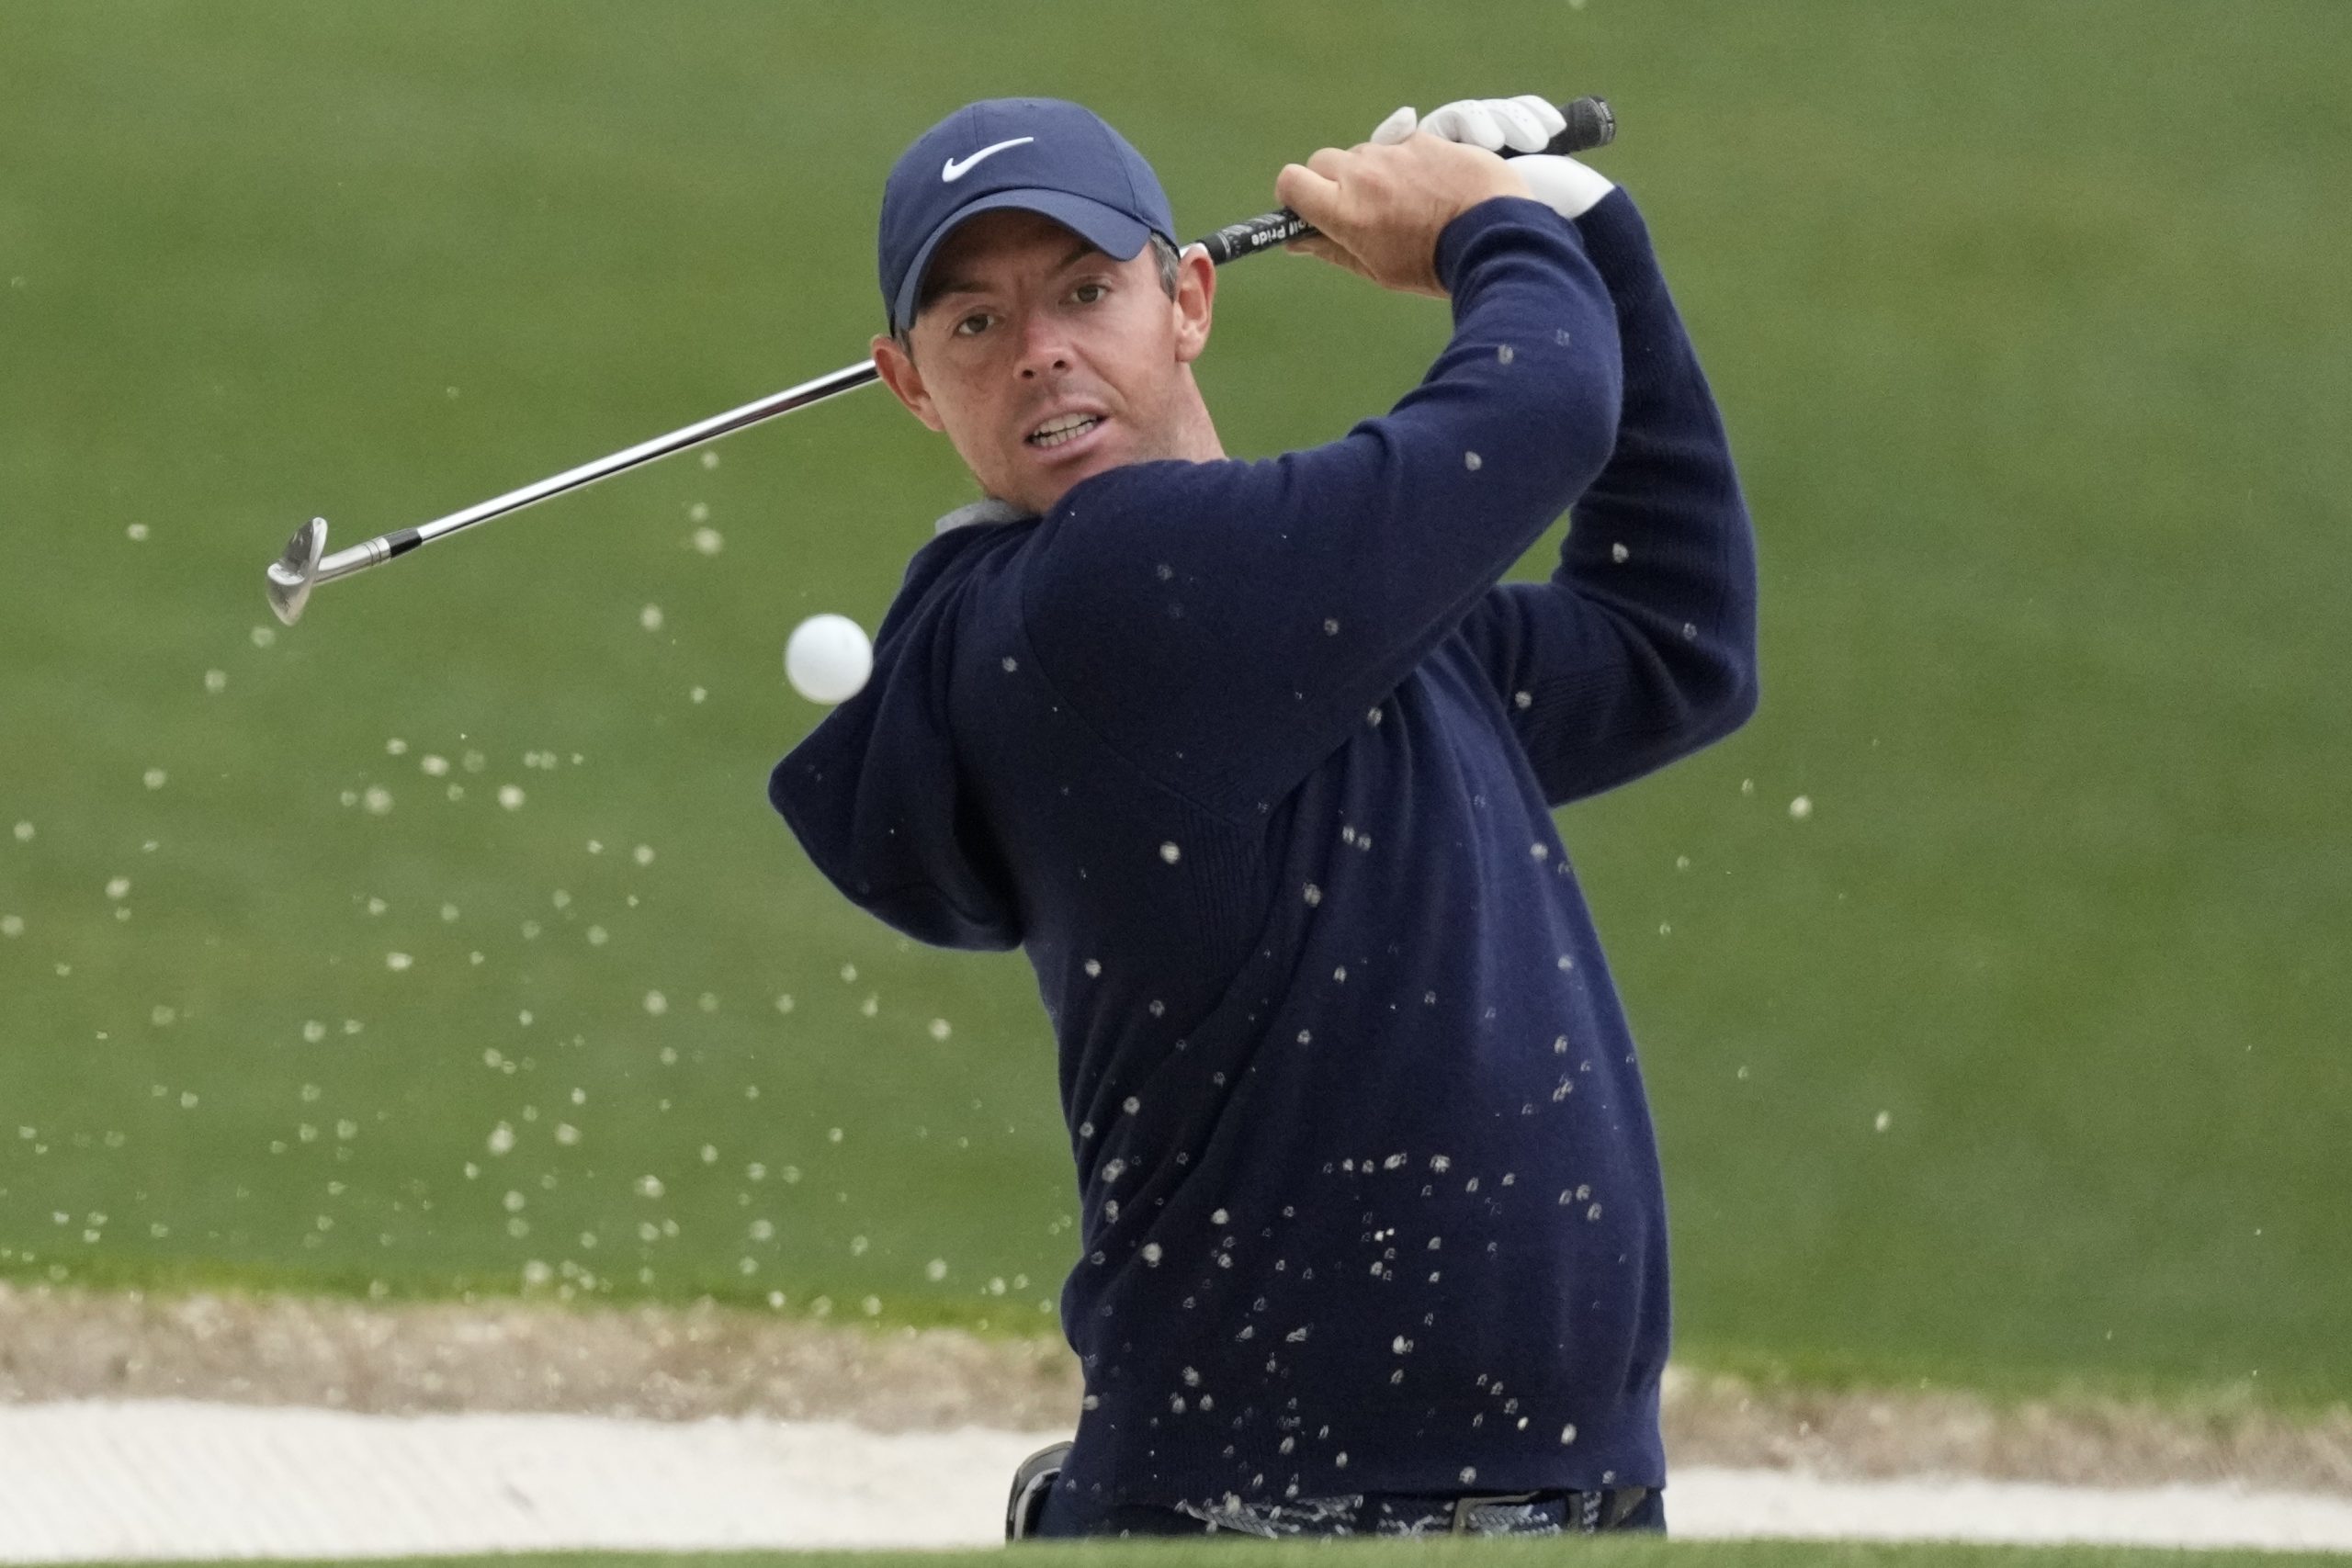 Rory McIlroy lowers expectations for US PGA Championship after his Masters agony